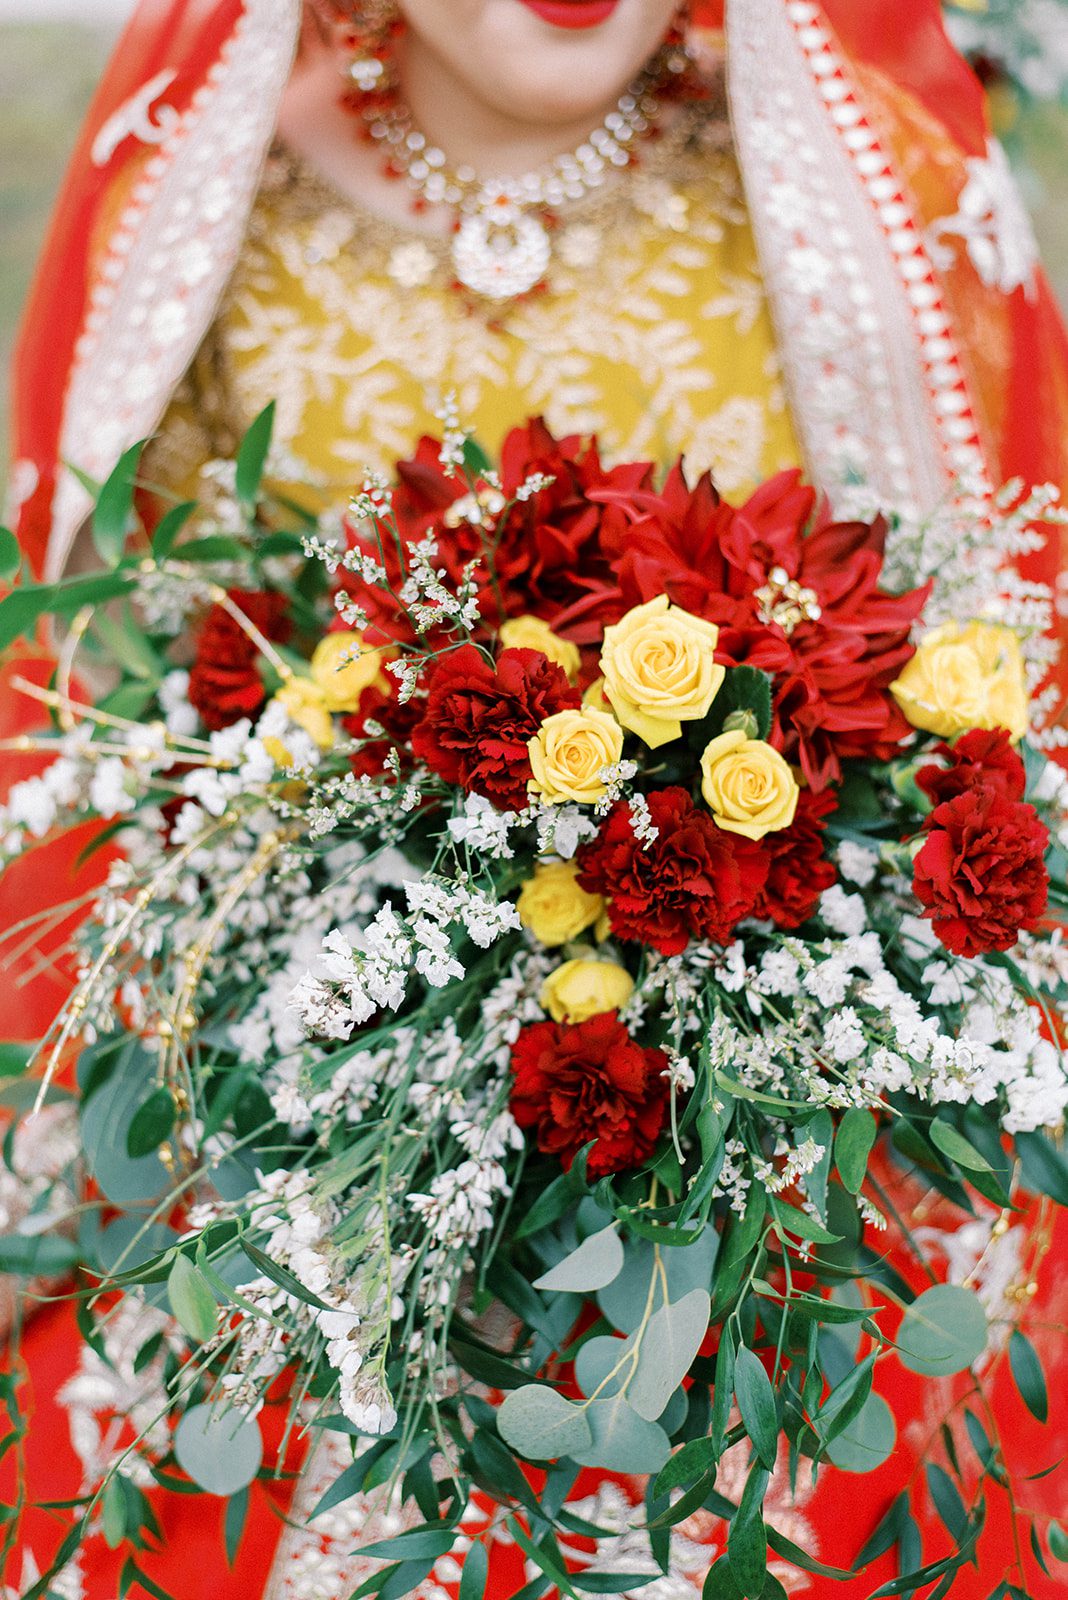 Indian Bride in red and yellow accents holding a red rose bouquet with lush greenery and yellow and white accent flowers